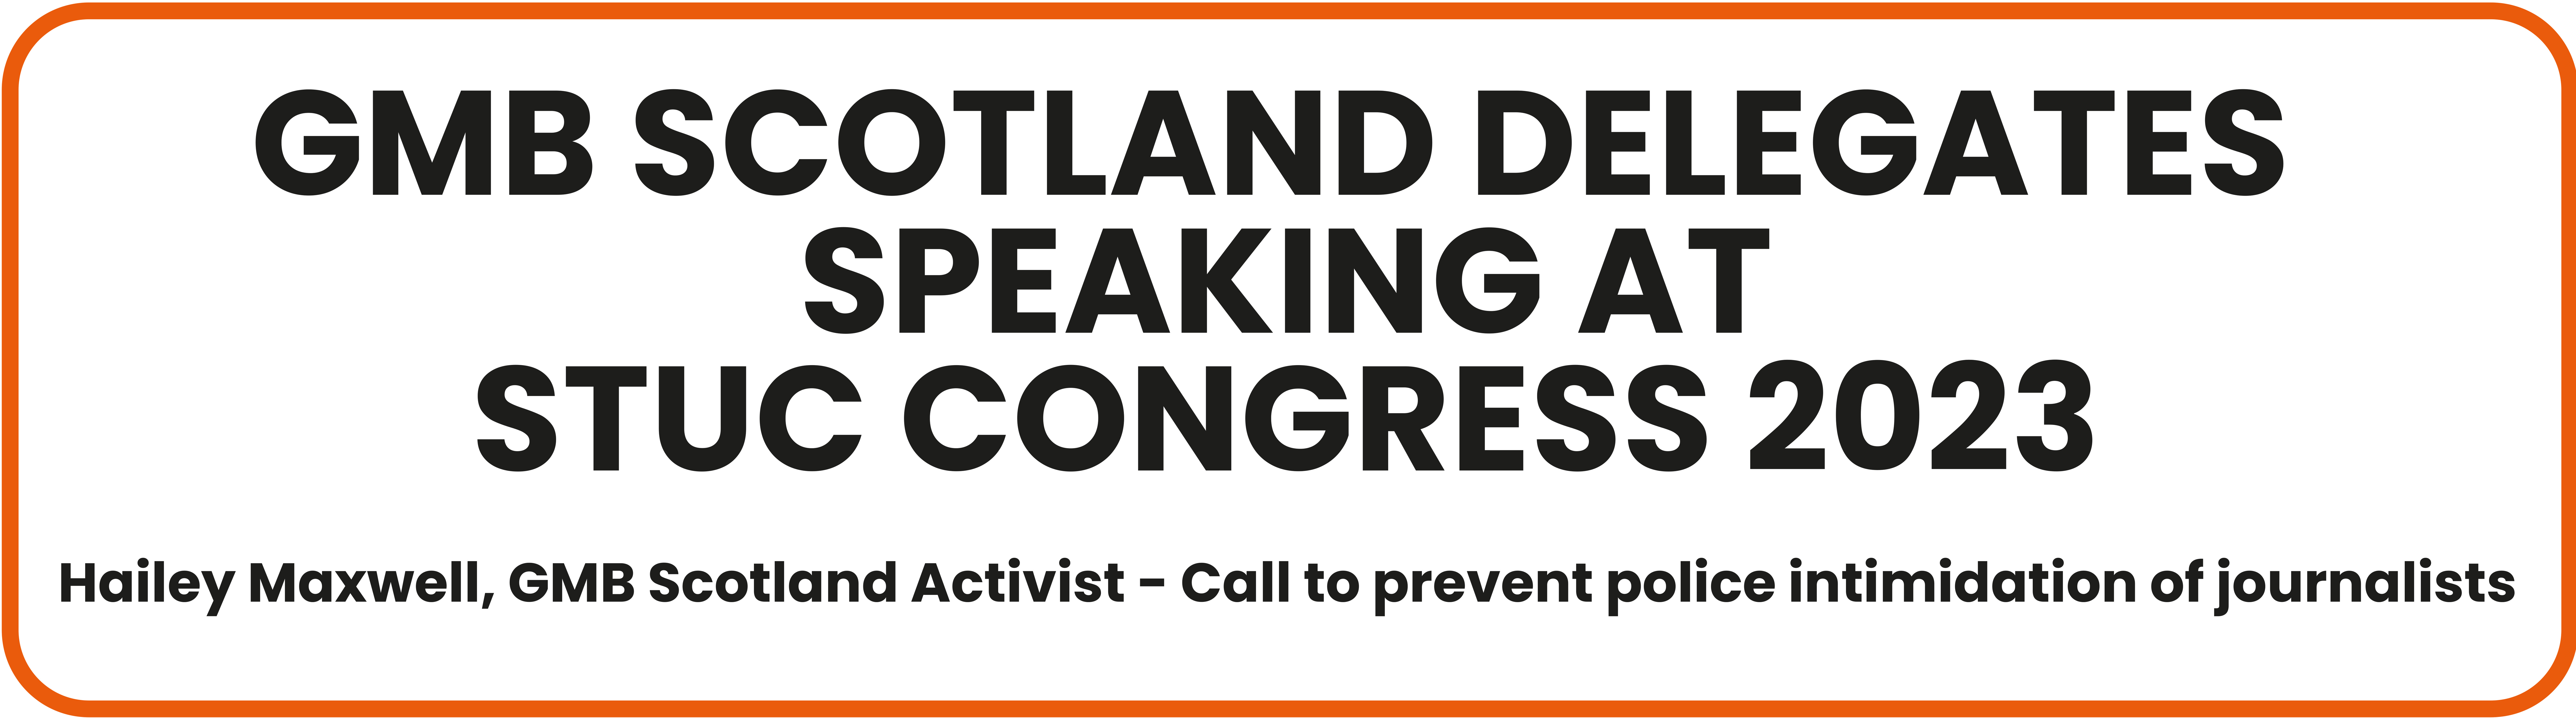 GMB Scotland at STUC: Call to prevent police intimidation of journalists